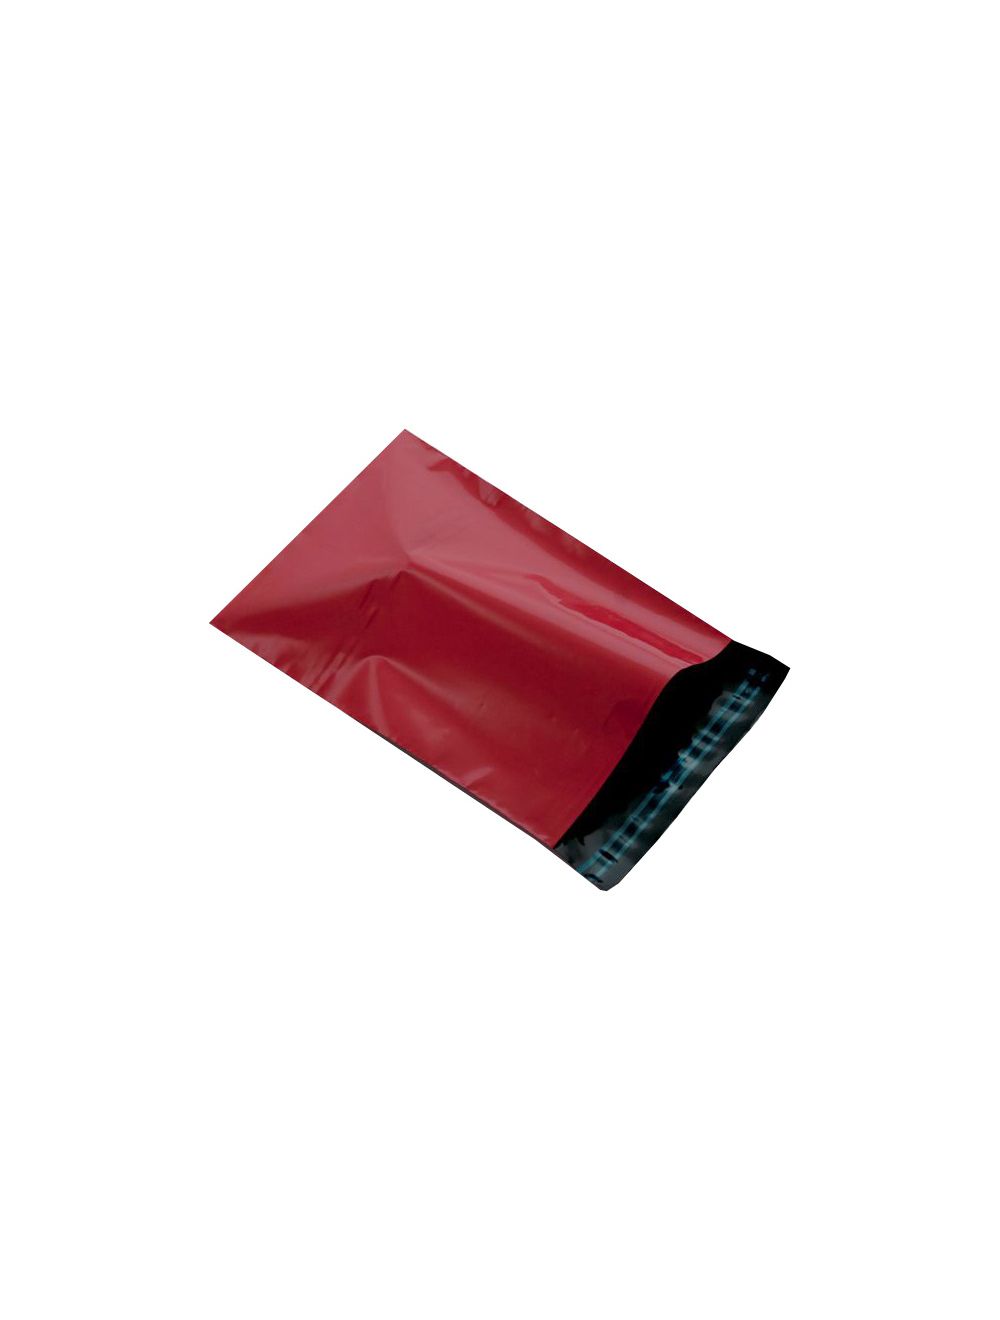 RED Mailing Bags 14" x 20" 350x500mm   Poly Postal Packaging  Choose QTY 